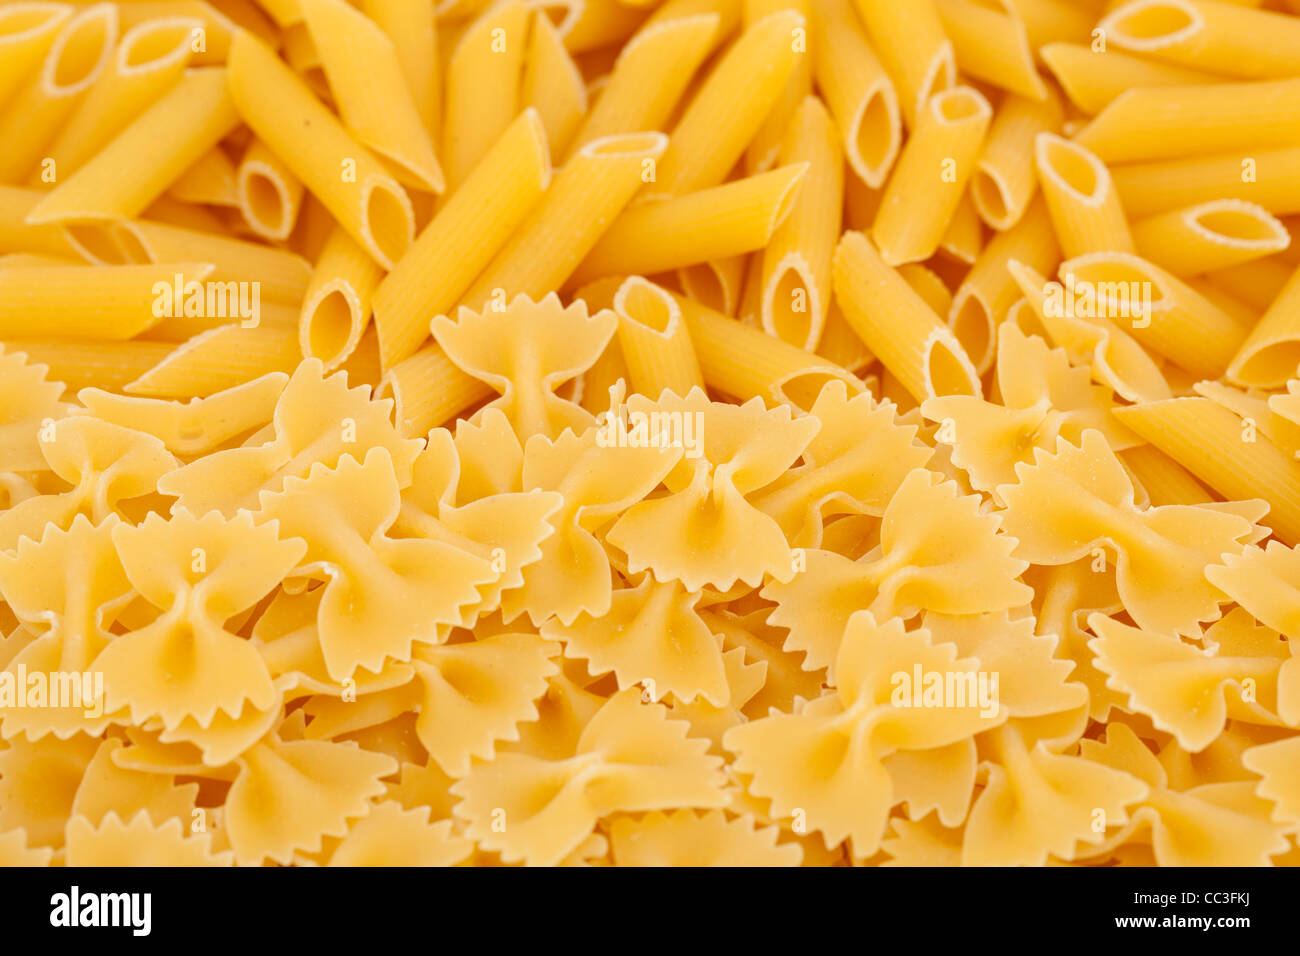 dry yellow pasta farfalle and penne as background Stock Photo